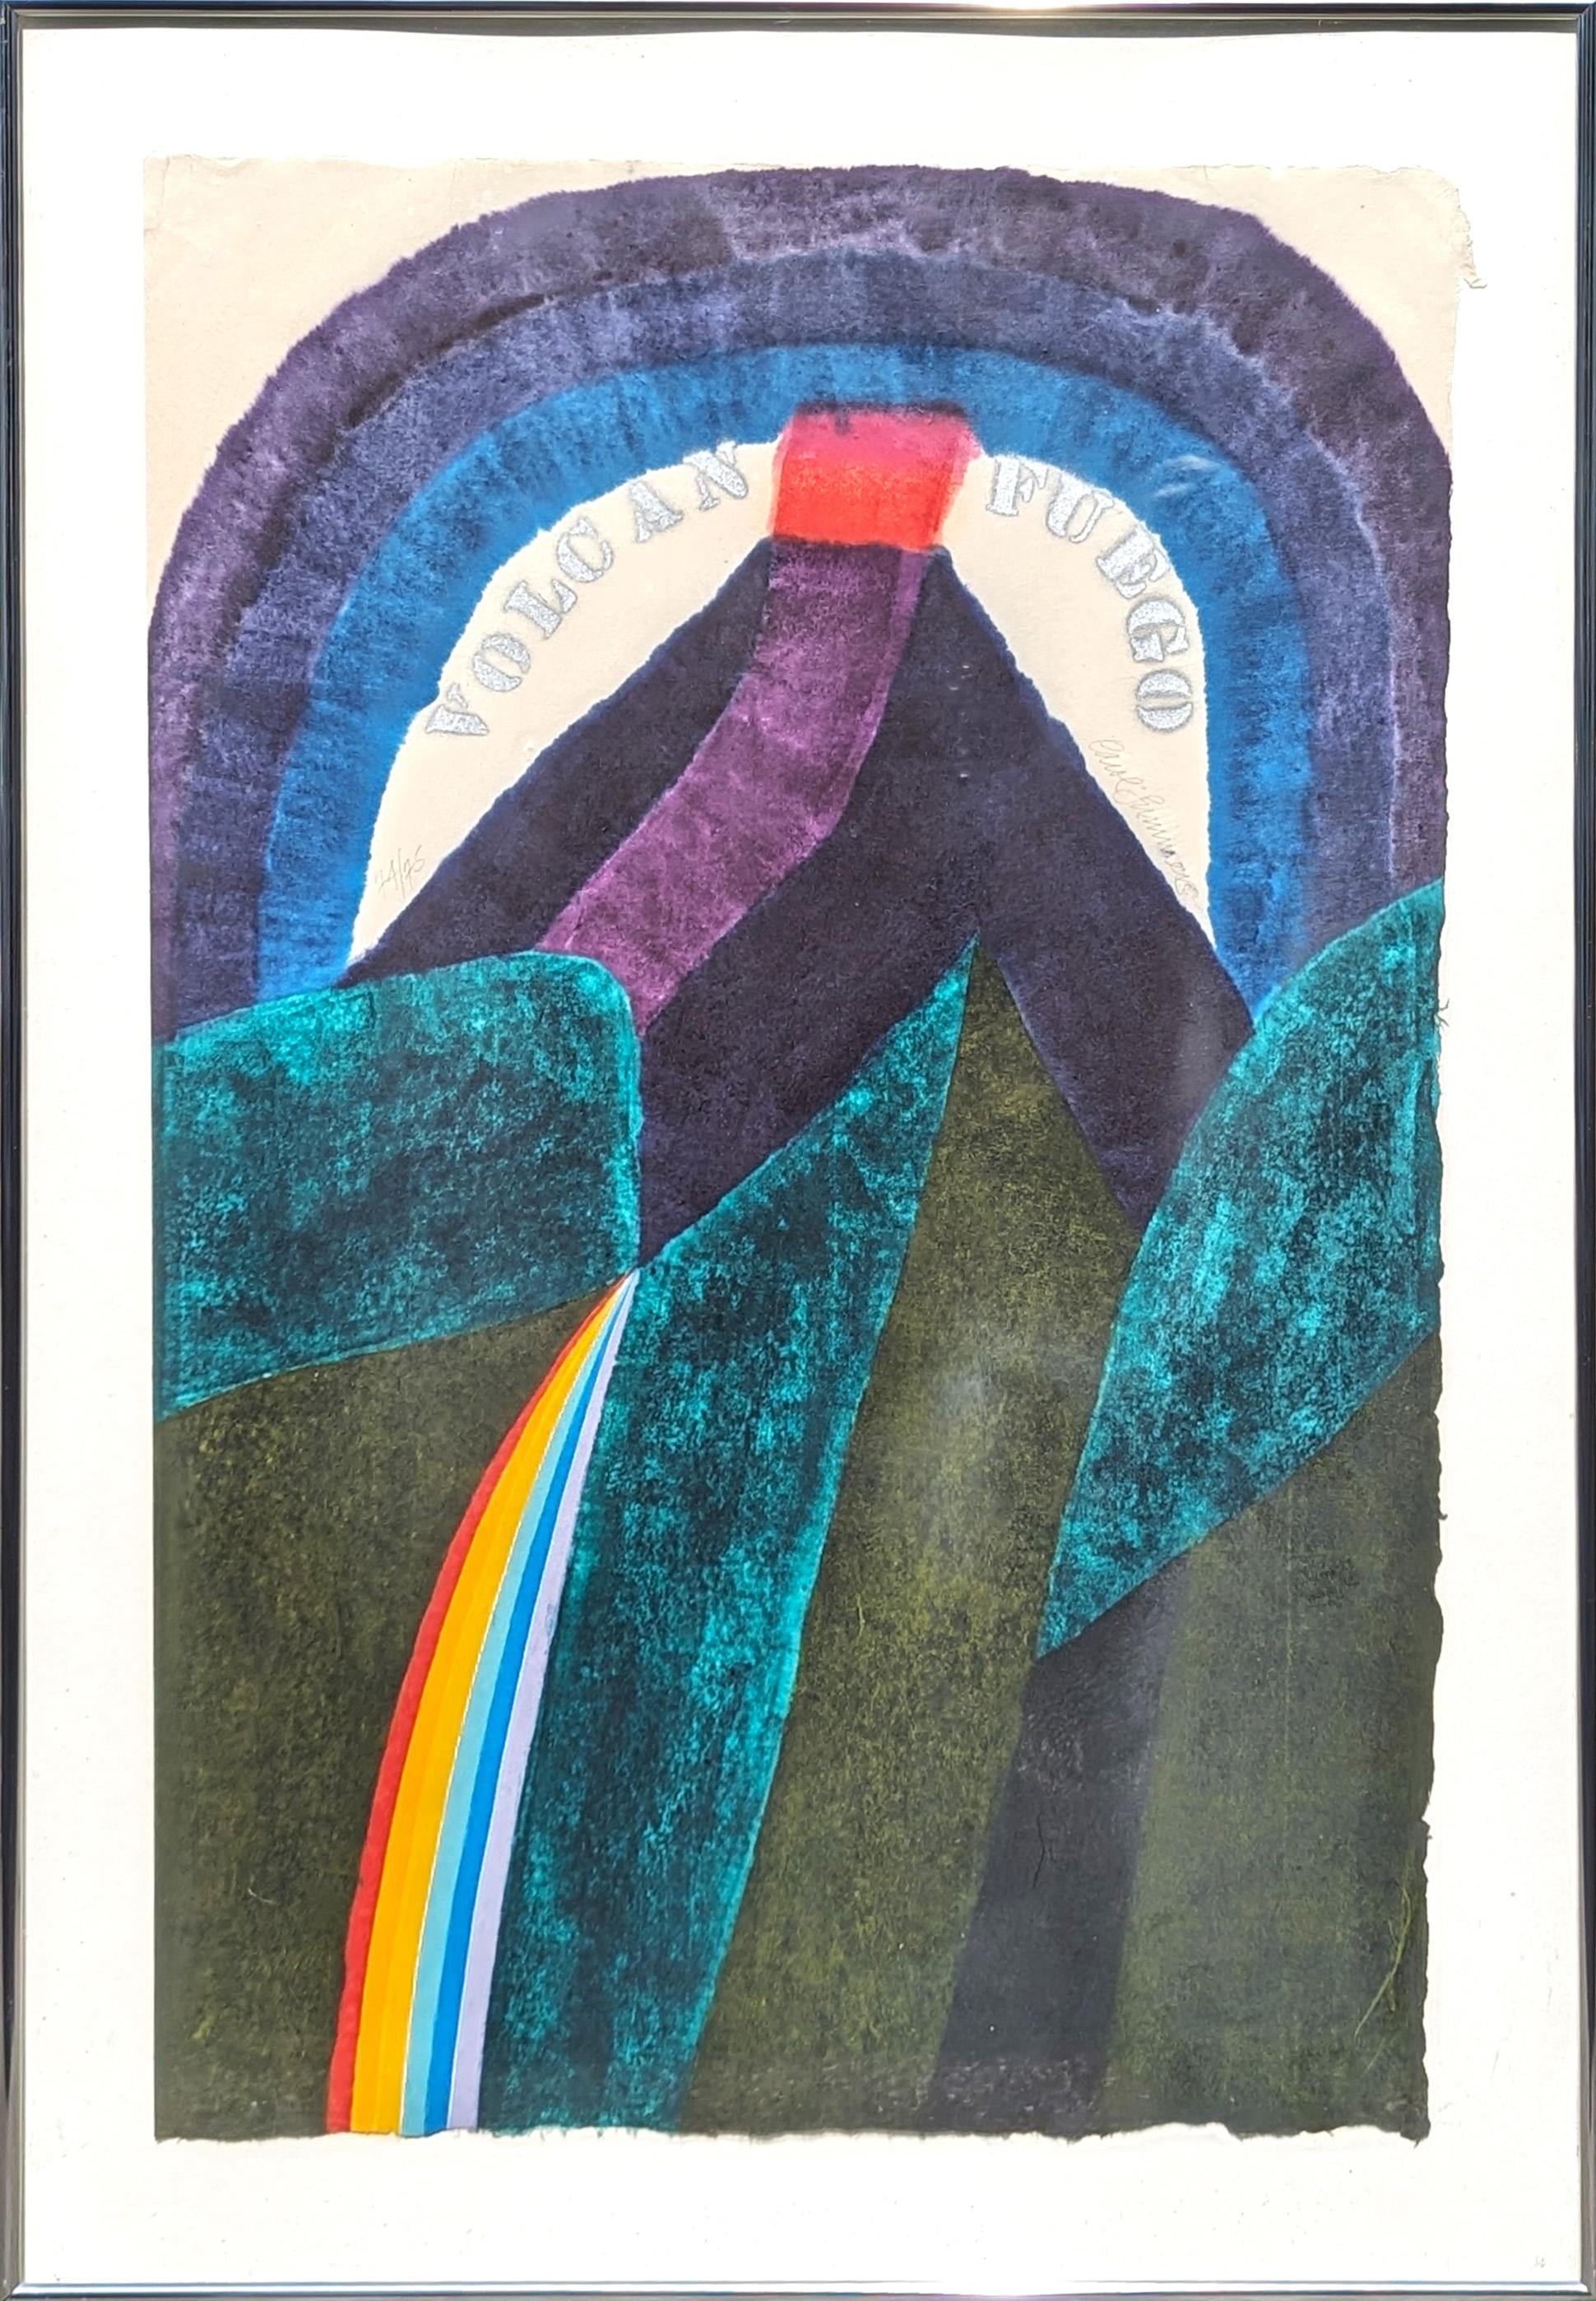 Carol Summers Landscape Print - “Volcano Fuego” Modern Colorful Abstract Landscape Woodcut Print Ed. 74/75